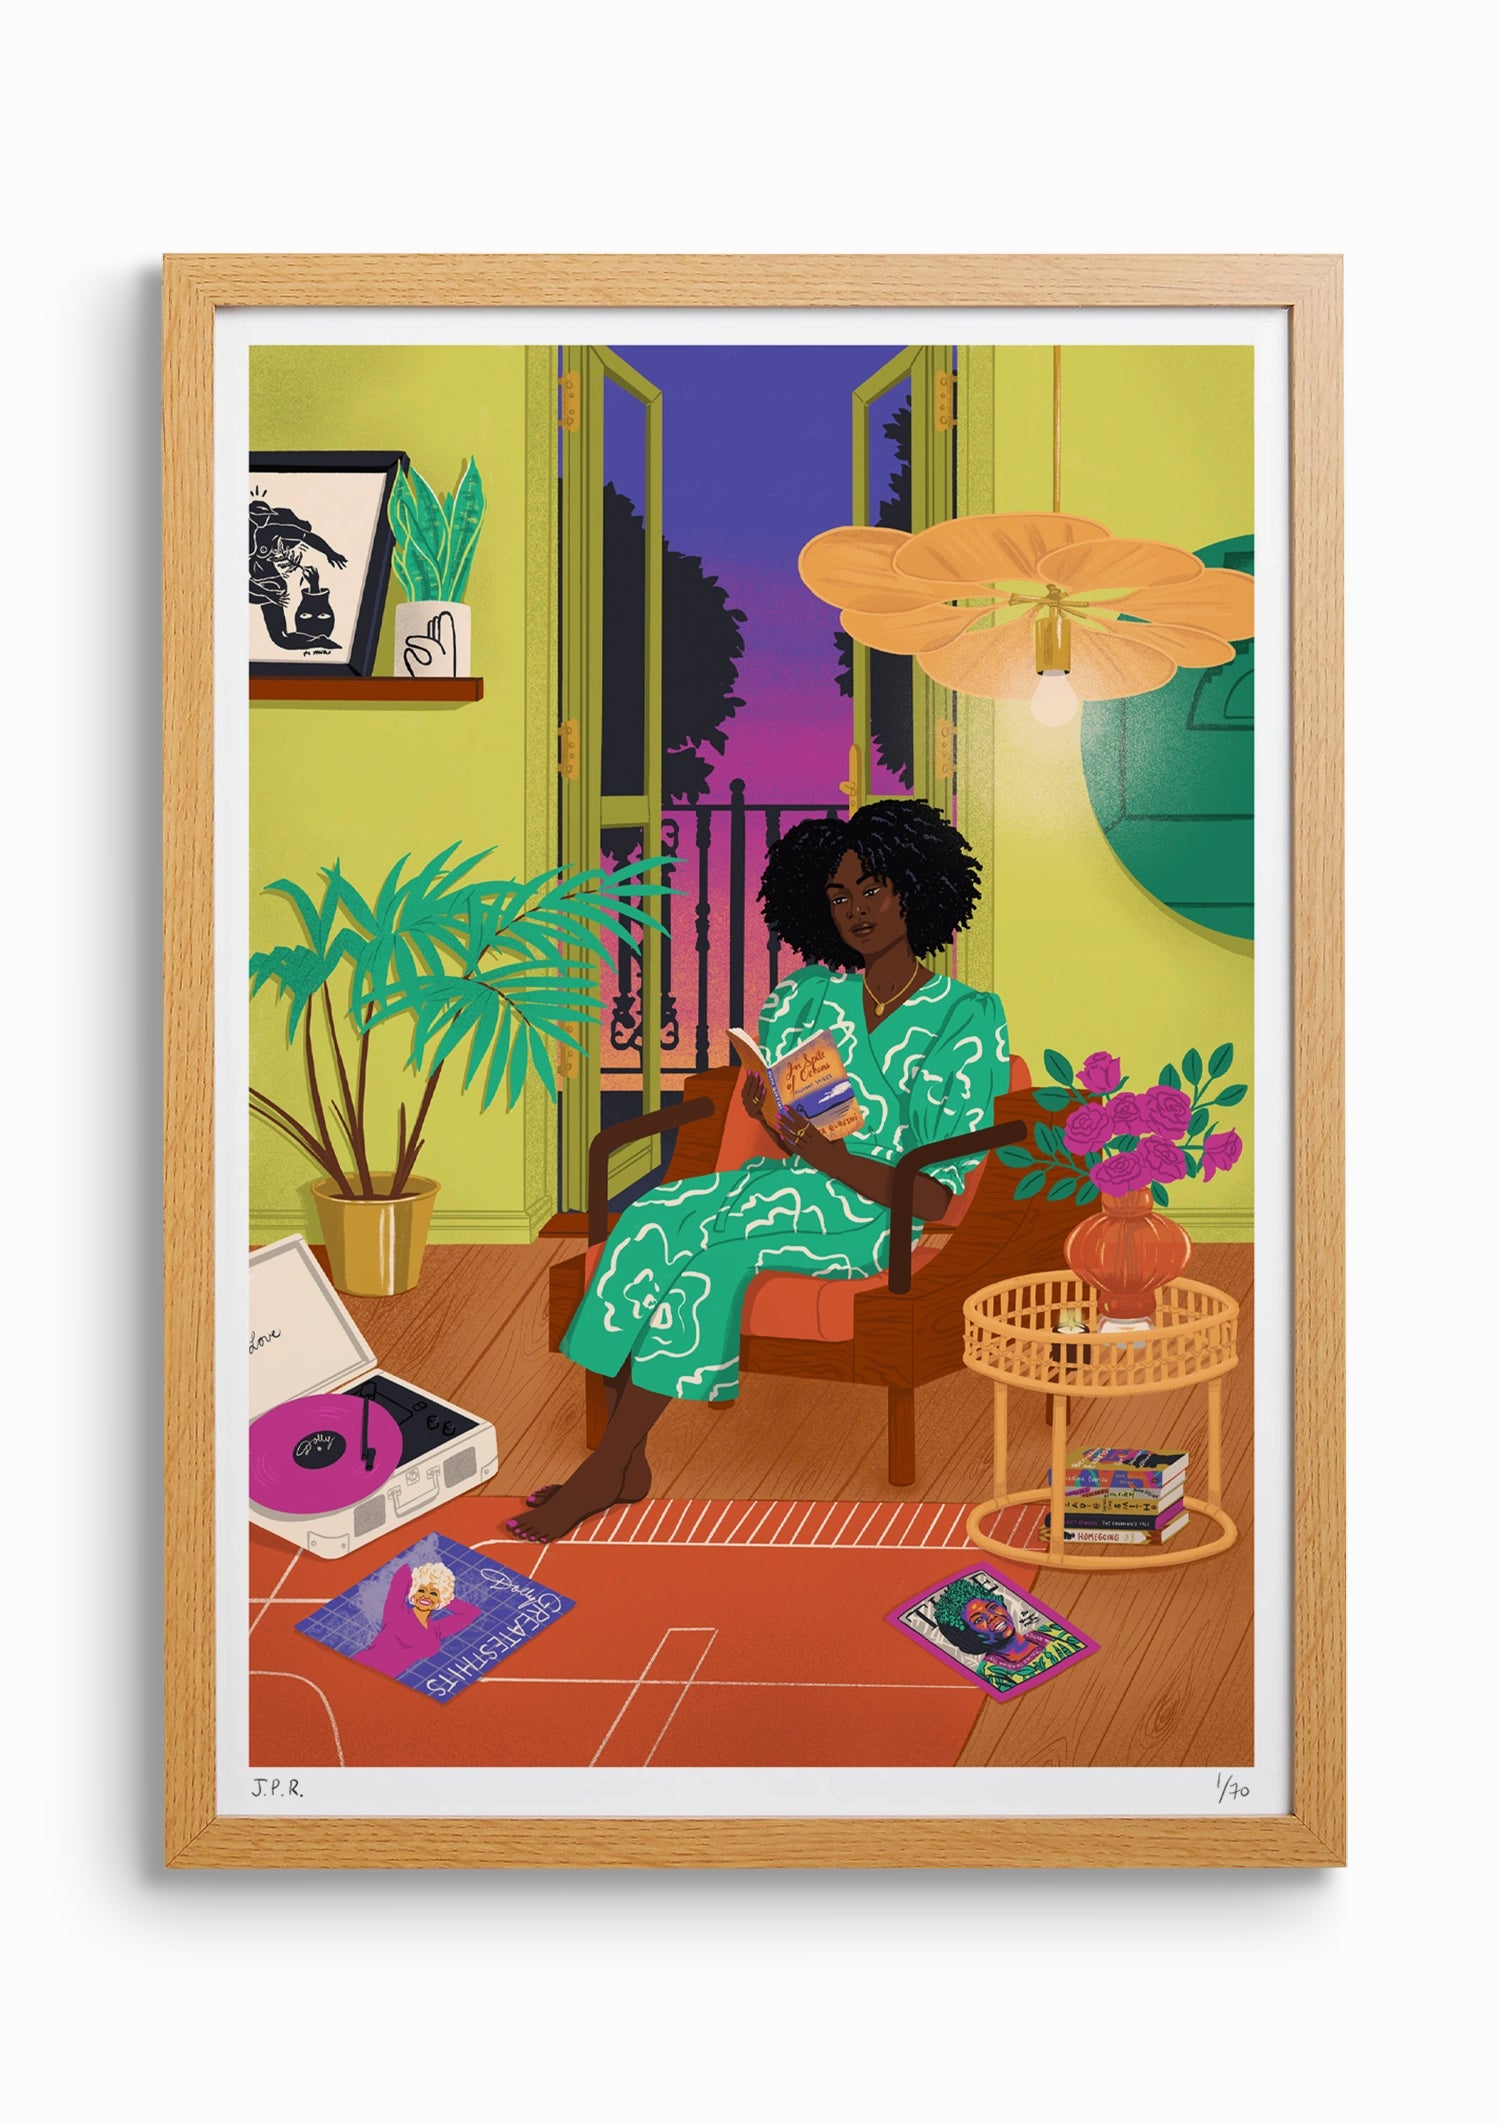 Framed illustration of a Black woman reading the book In Spite of Oceans by Huma Qureshi. She is sat by the opened door giving out to a sunset and she is surrounded by books, magazines, and vinyls.